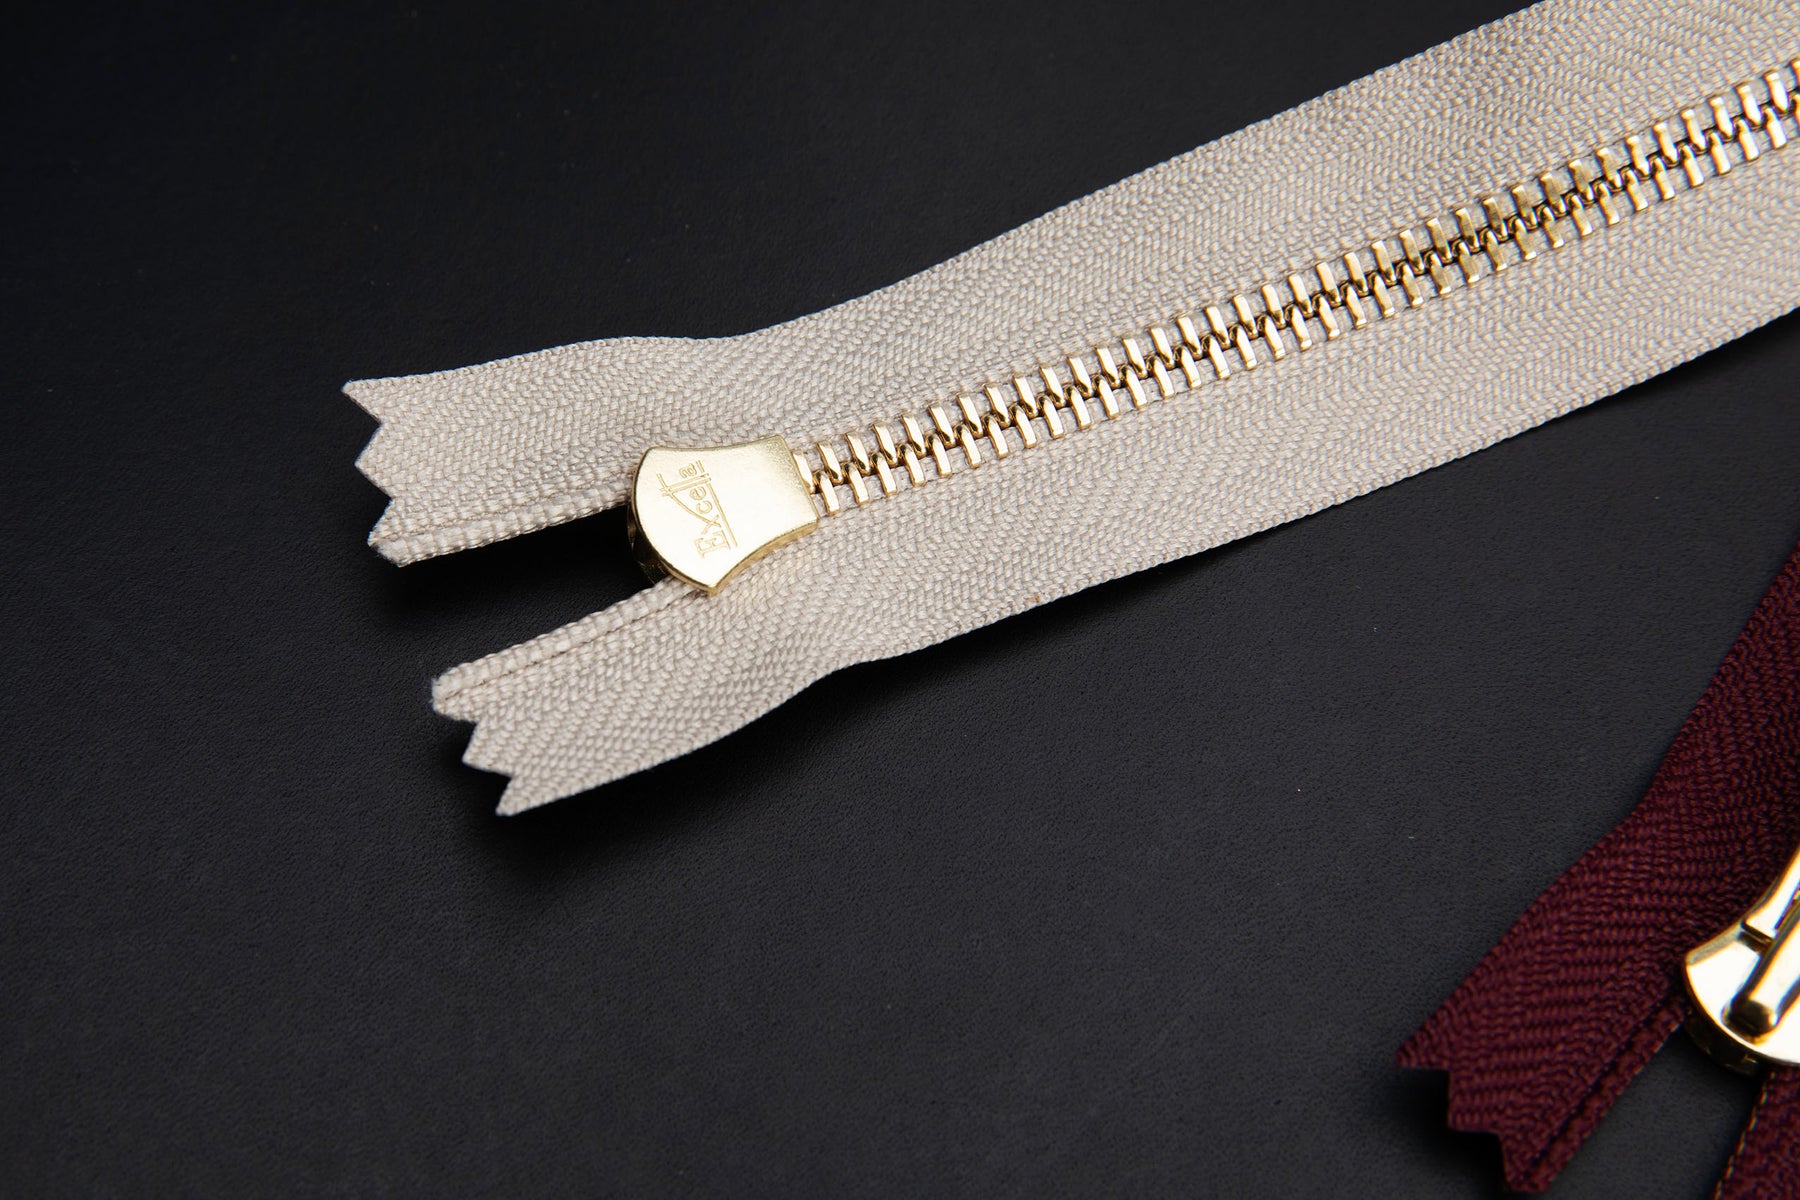 YKK Excella Zippers - Size #5 - Single Chain (Brass) - 30 inches